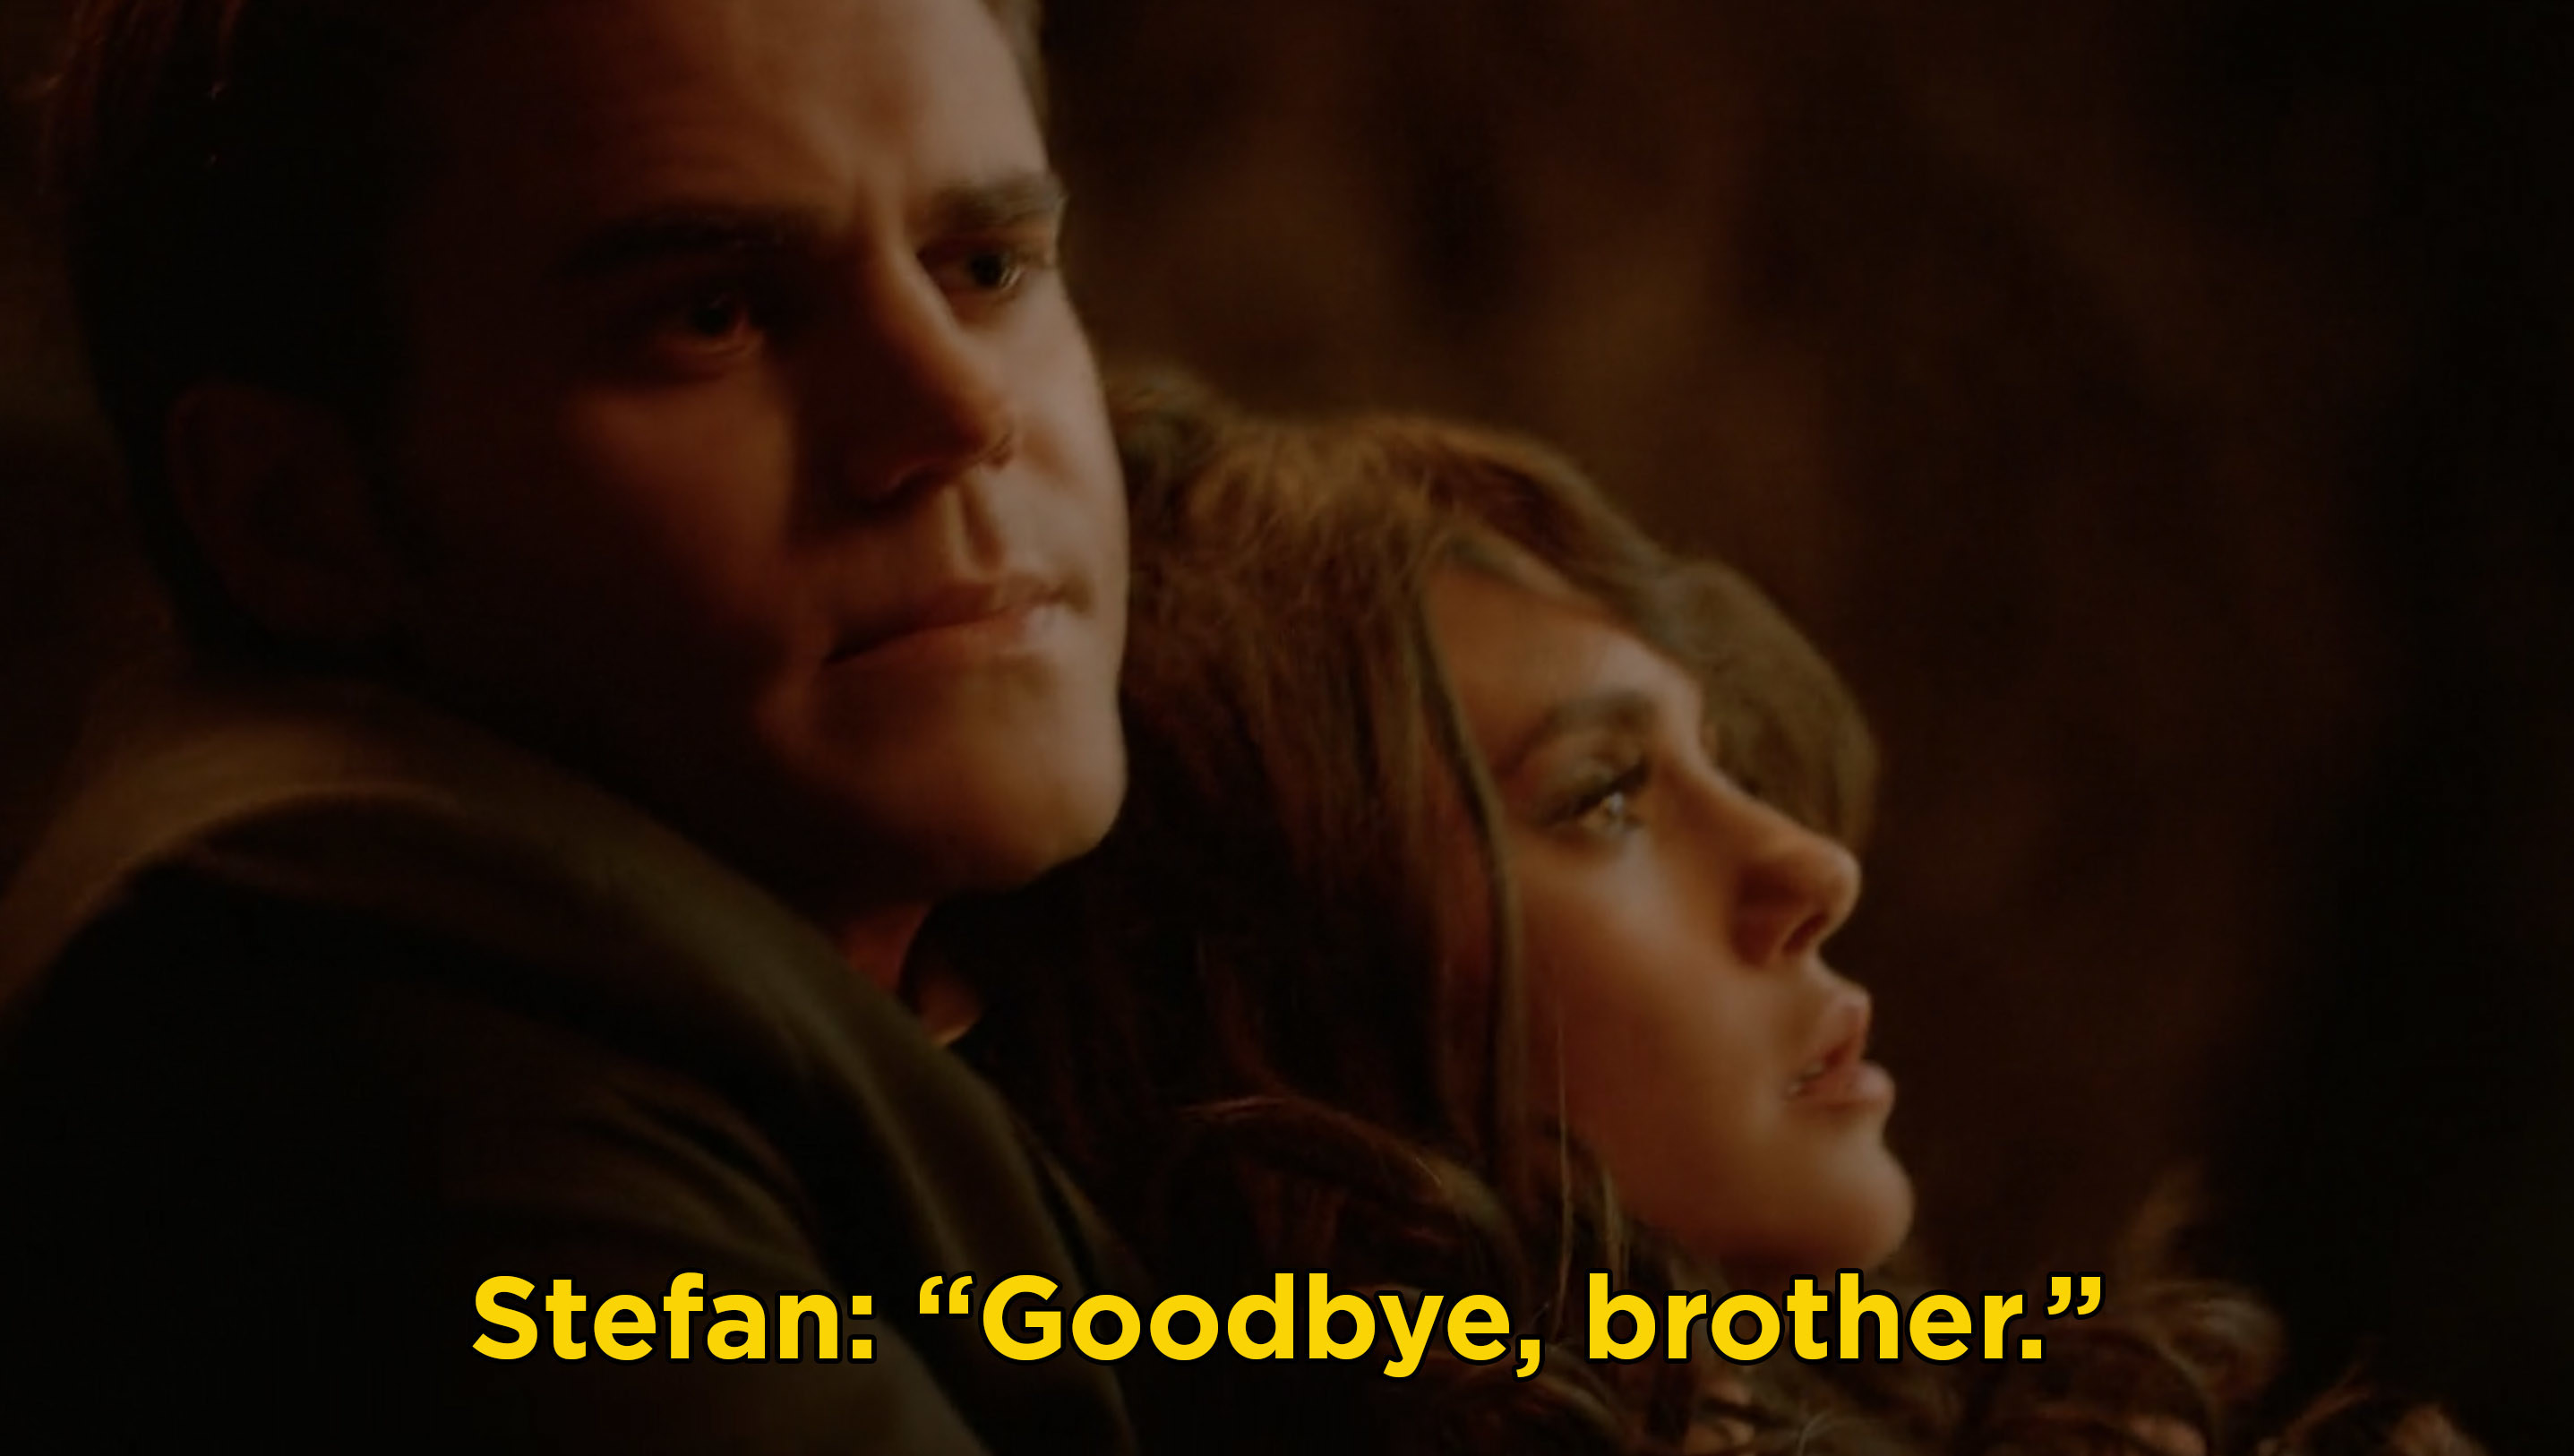 27 The Vampire Diaries Scenes That Are Absolutely Heart Wrenching From Start To Finish